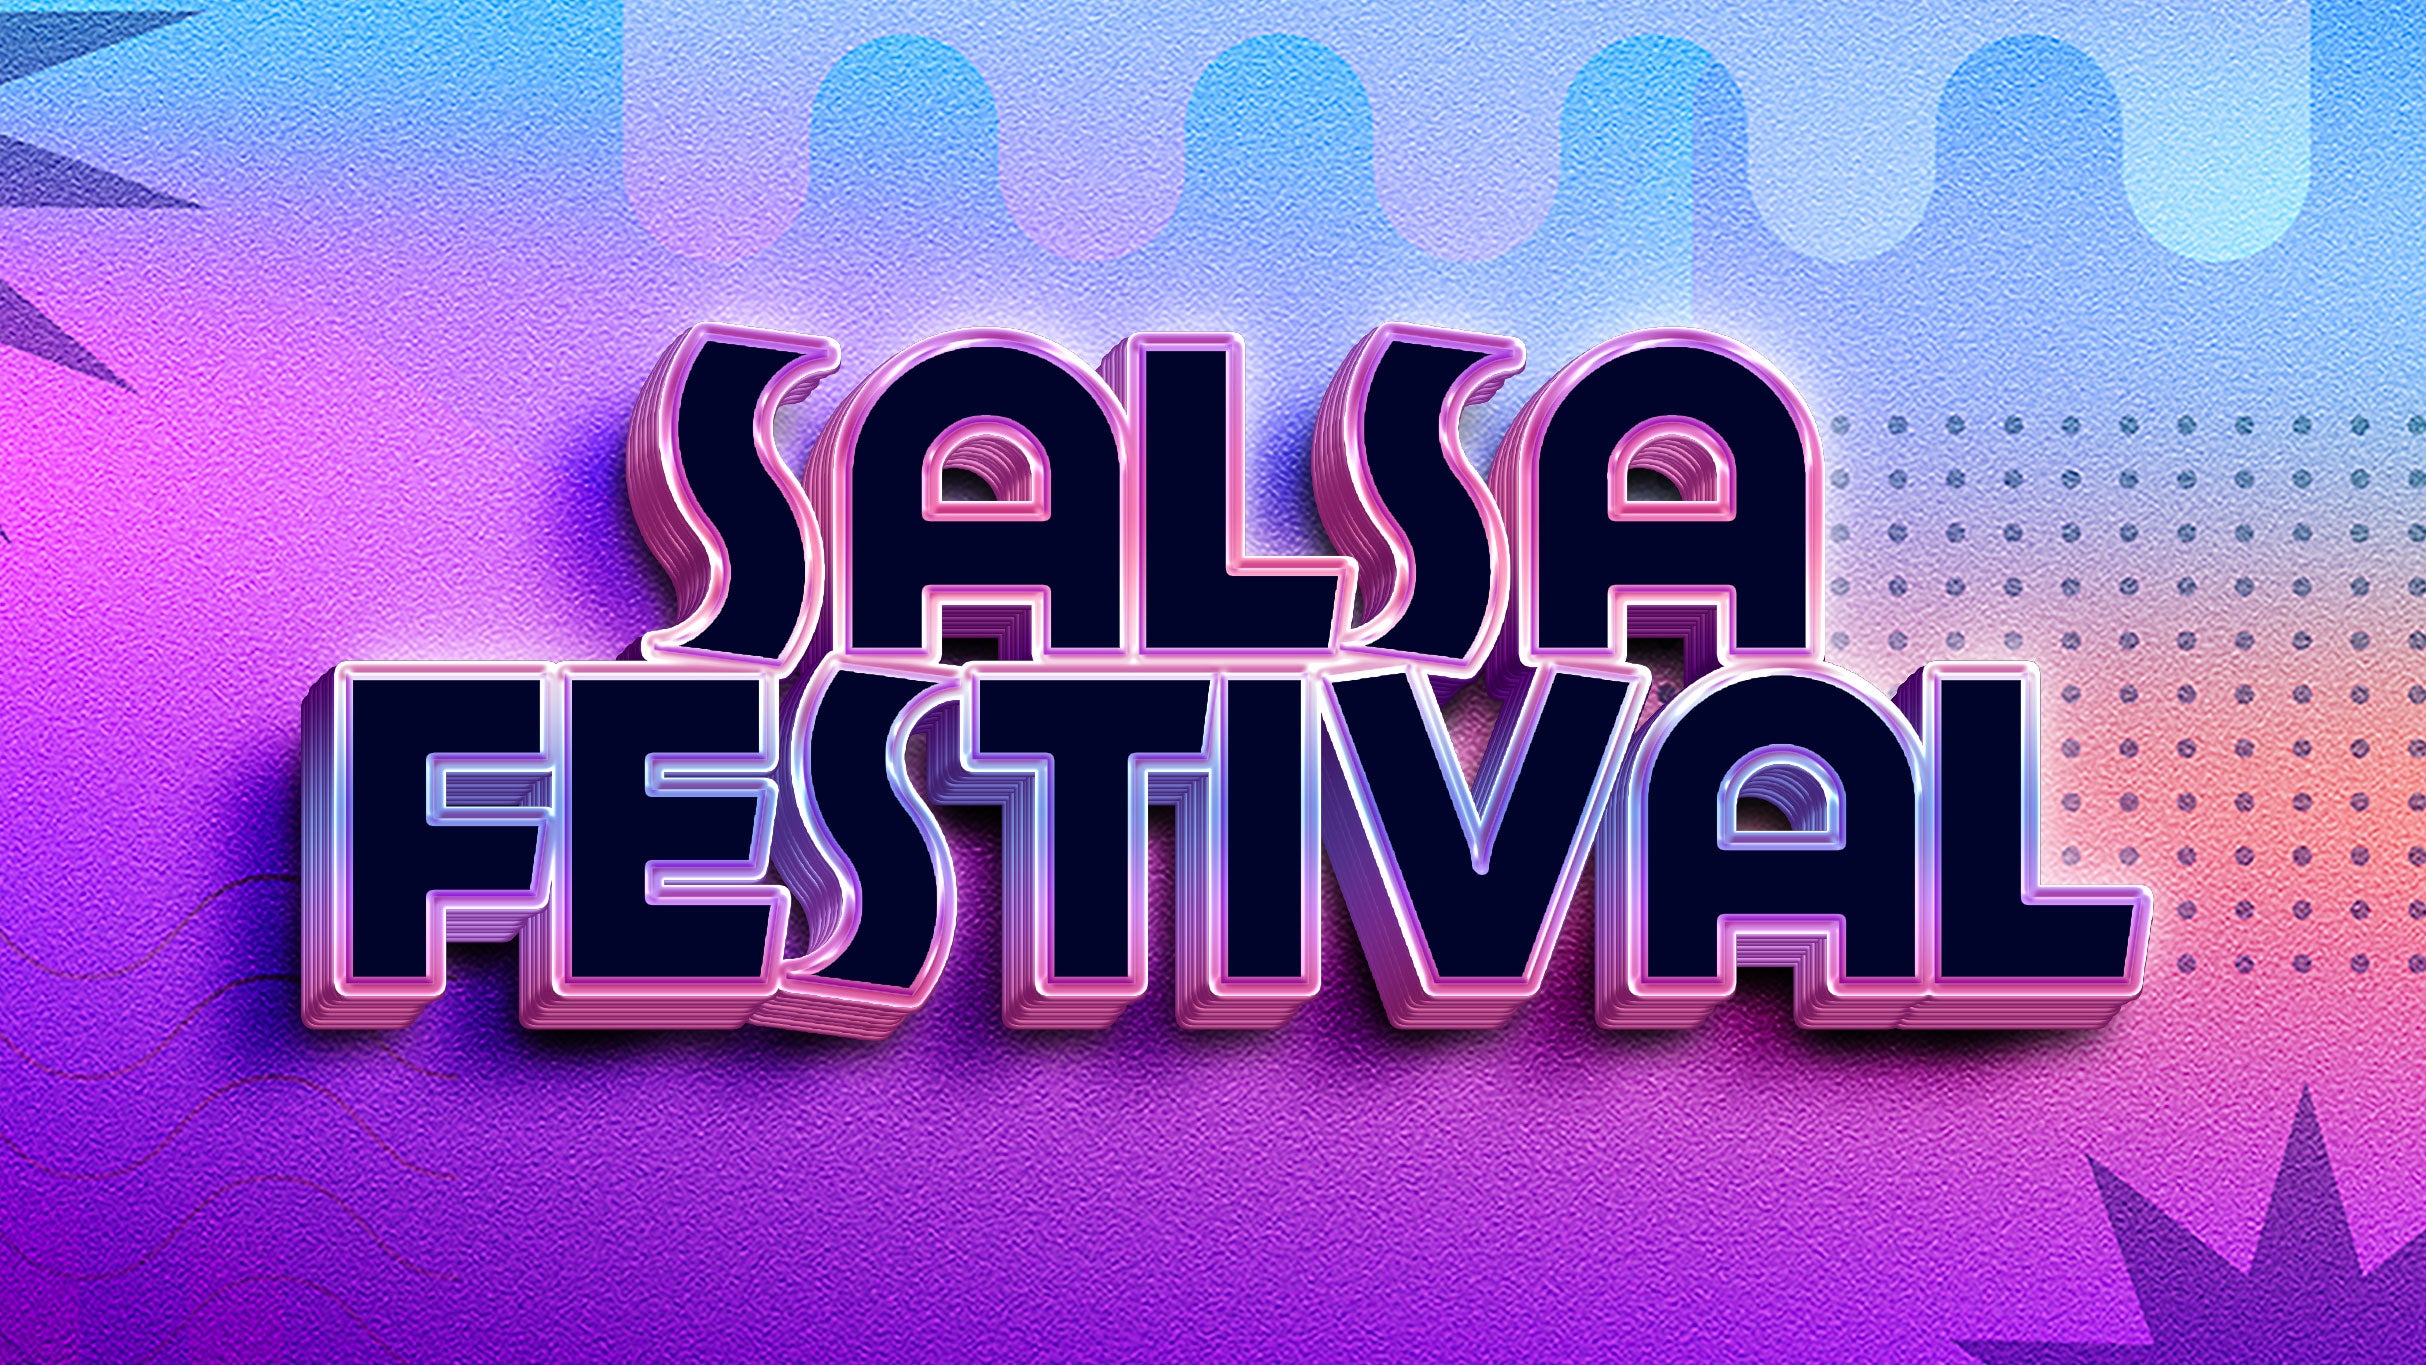 The New York Salsa Festival at Barclays Center